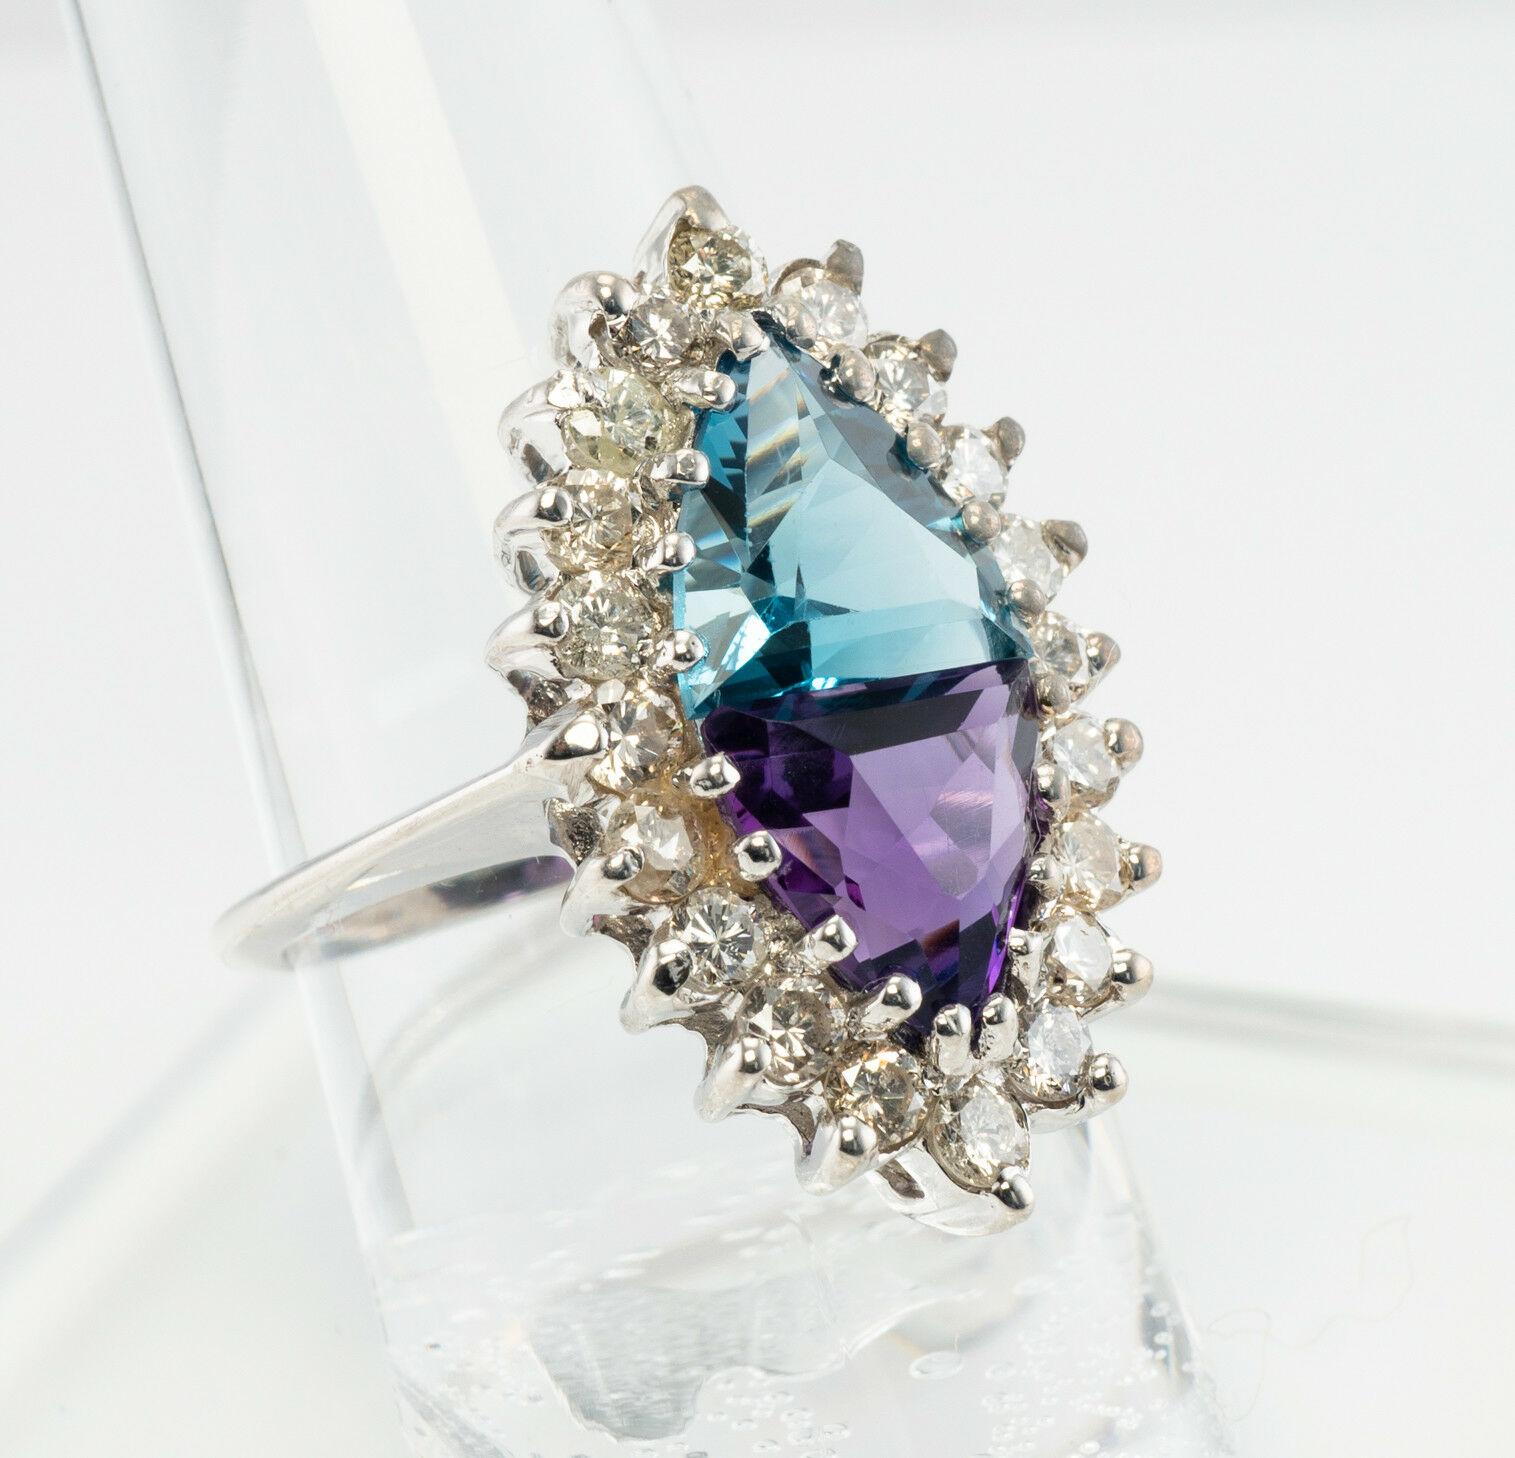 This stunning estate ring is crafted in solid 14K White Gold (carefully tested and guaranteed) and set with trillion cut Topaz and Amethyst, and diamonds. Each genuine Earth mined fancy-cut gemstone measures 8mm x 8mm; they are very clean and